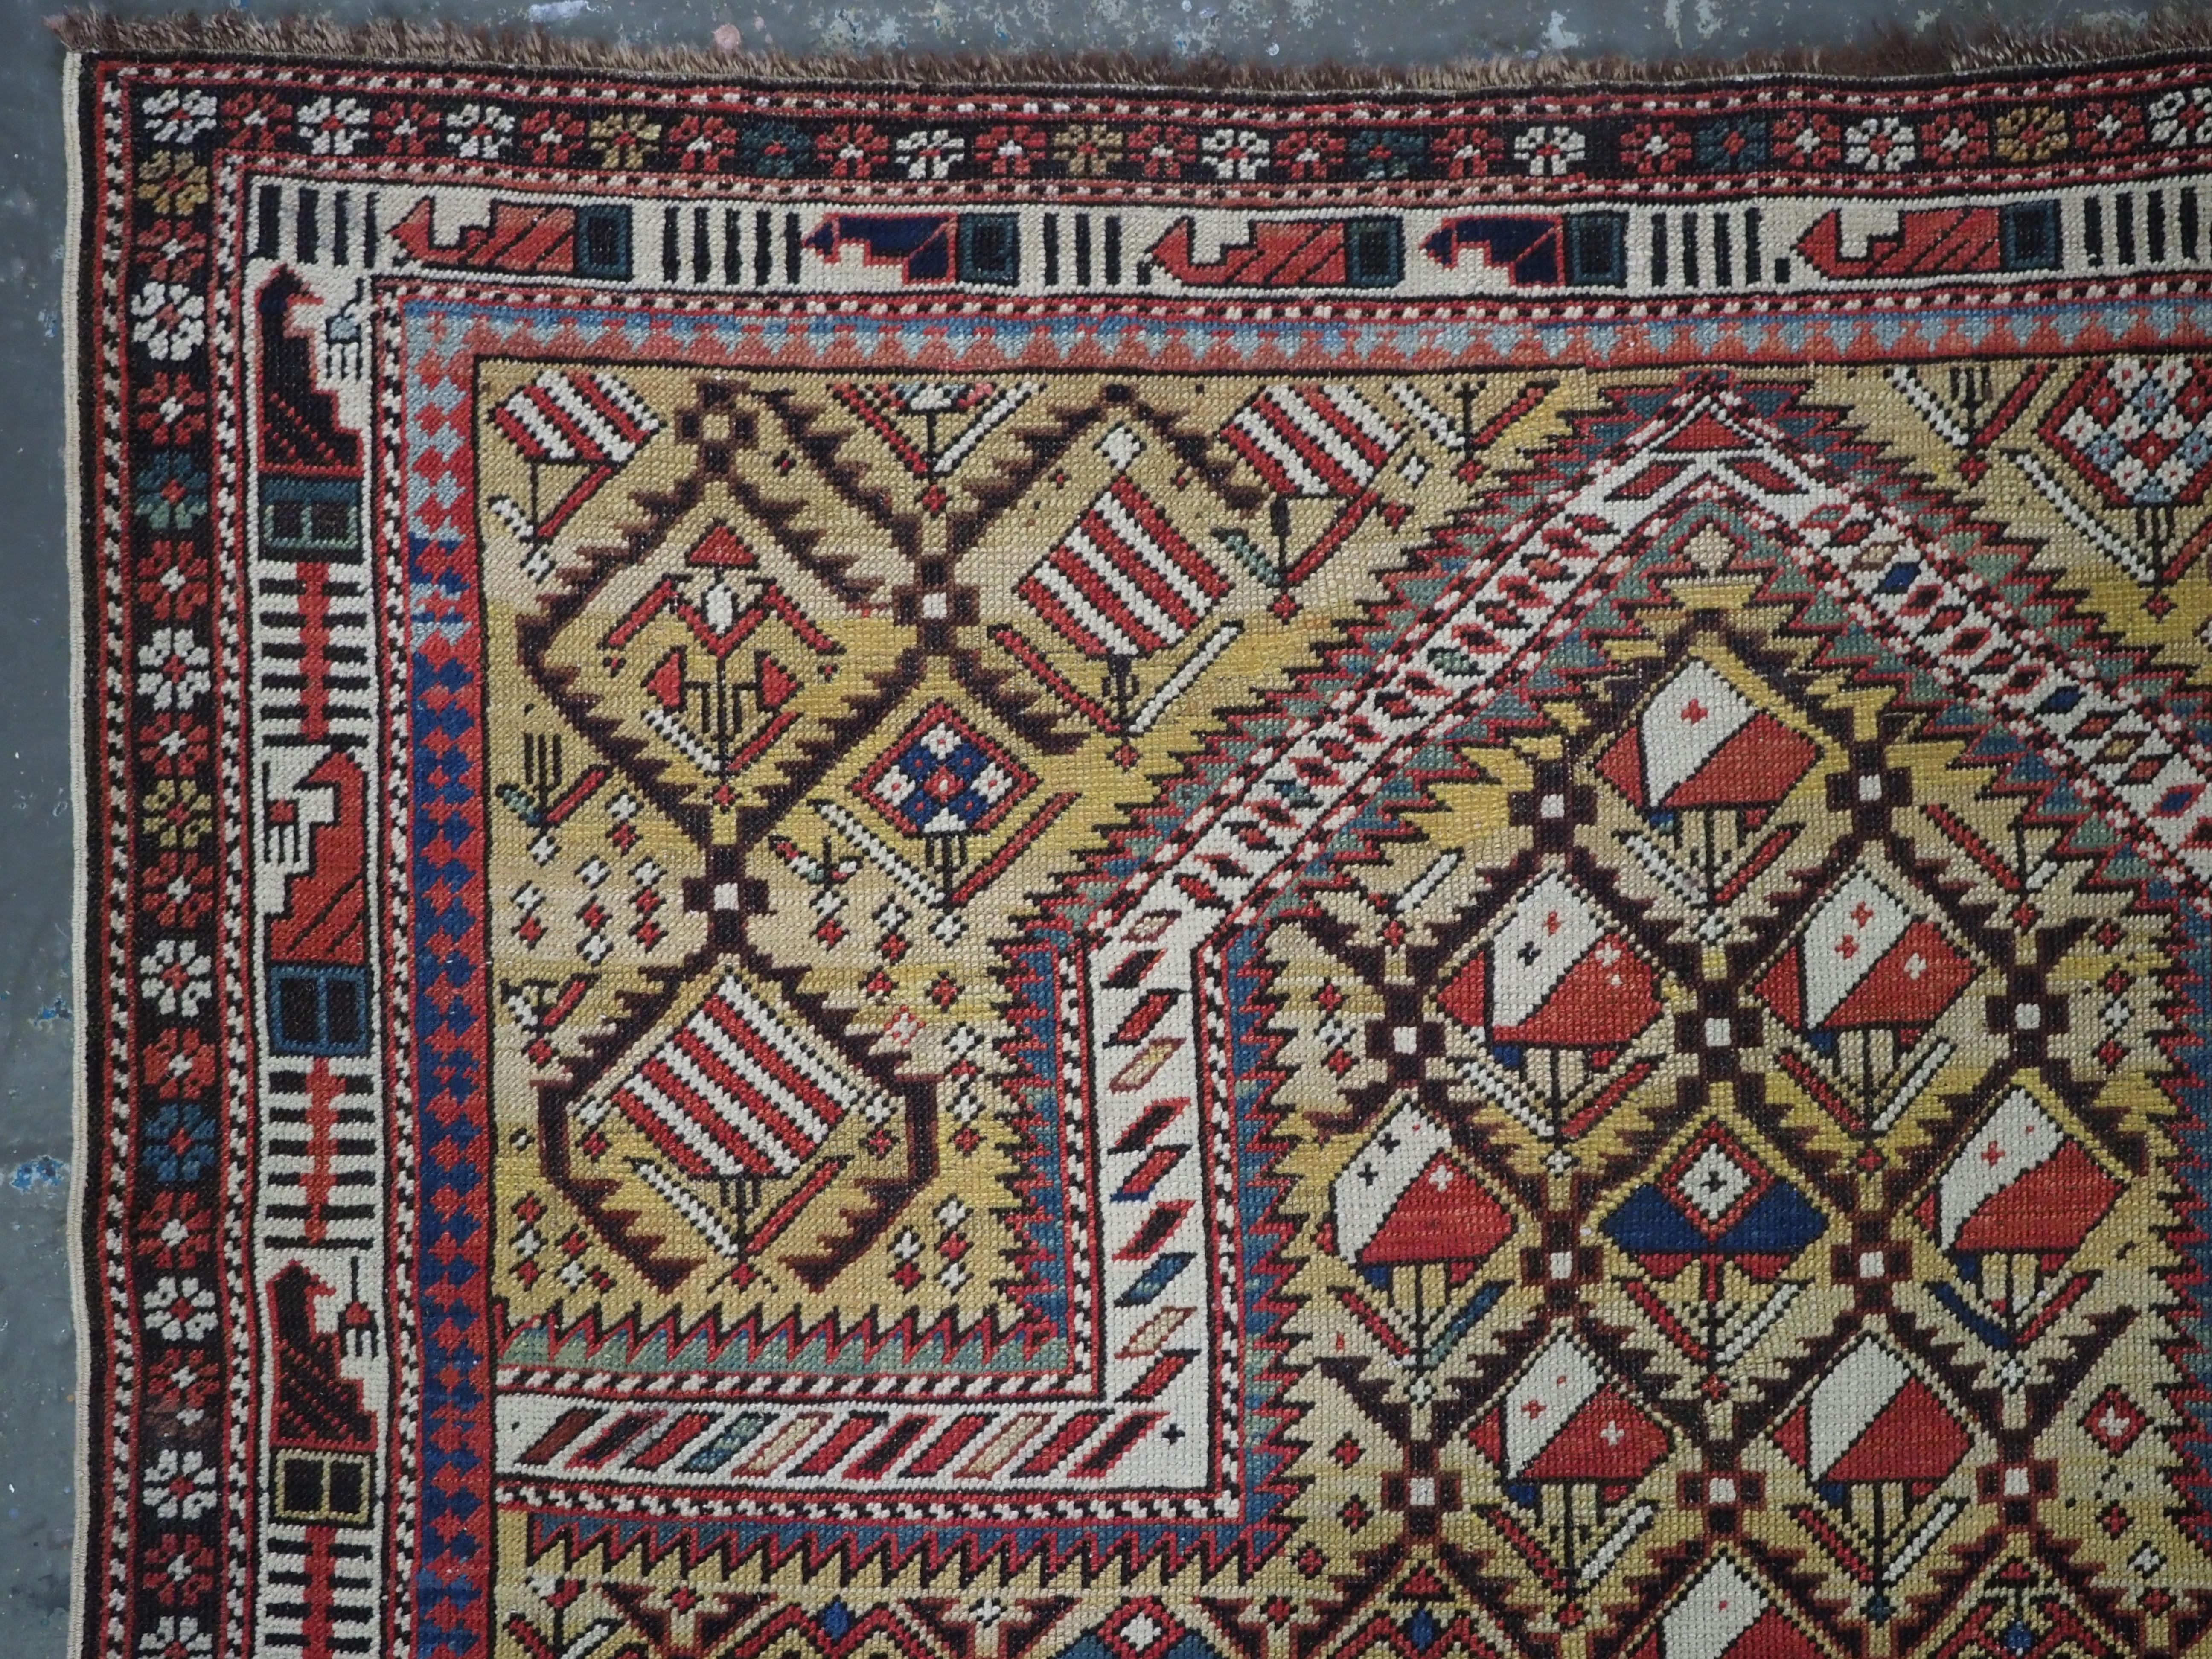 Size: 4ft 6in x 4ft 0in. (137 x 121cm).

Antique Caucasian Marasali prayer rug of the scarce 'yellow' ground colour.

Circa 1850 or earlier.

This outstanding rug belongs to a scarce group of yellow ground prayer rugs with a diamond lattice. Each